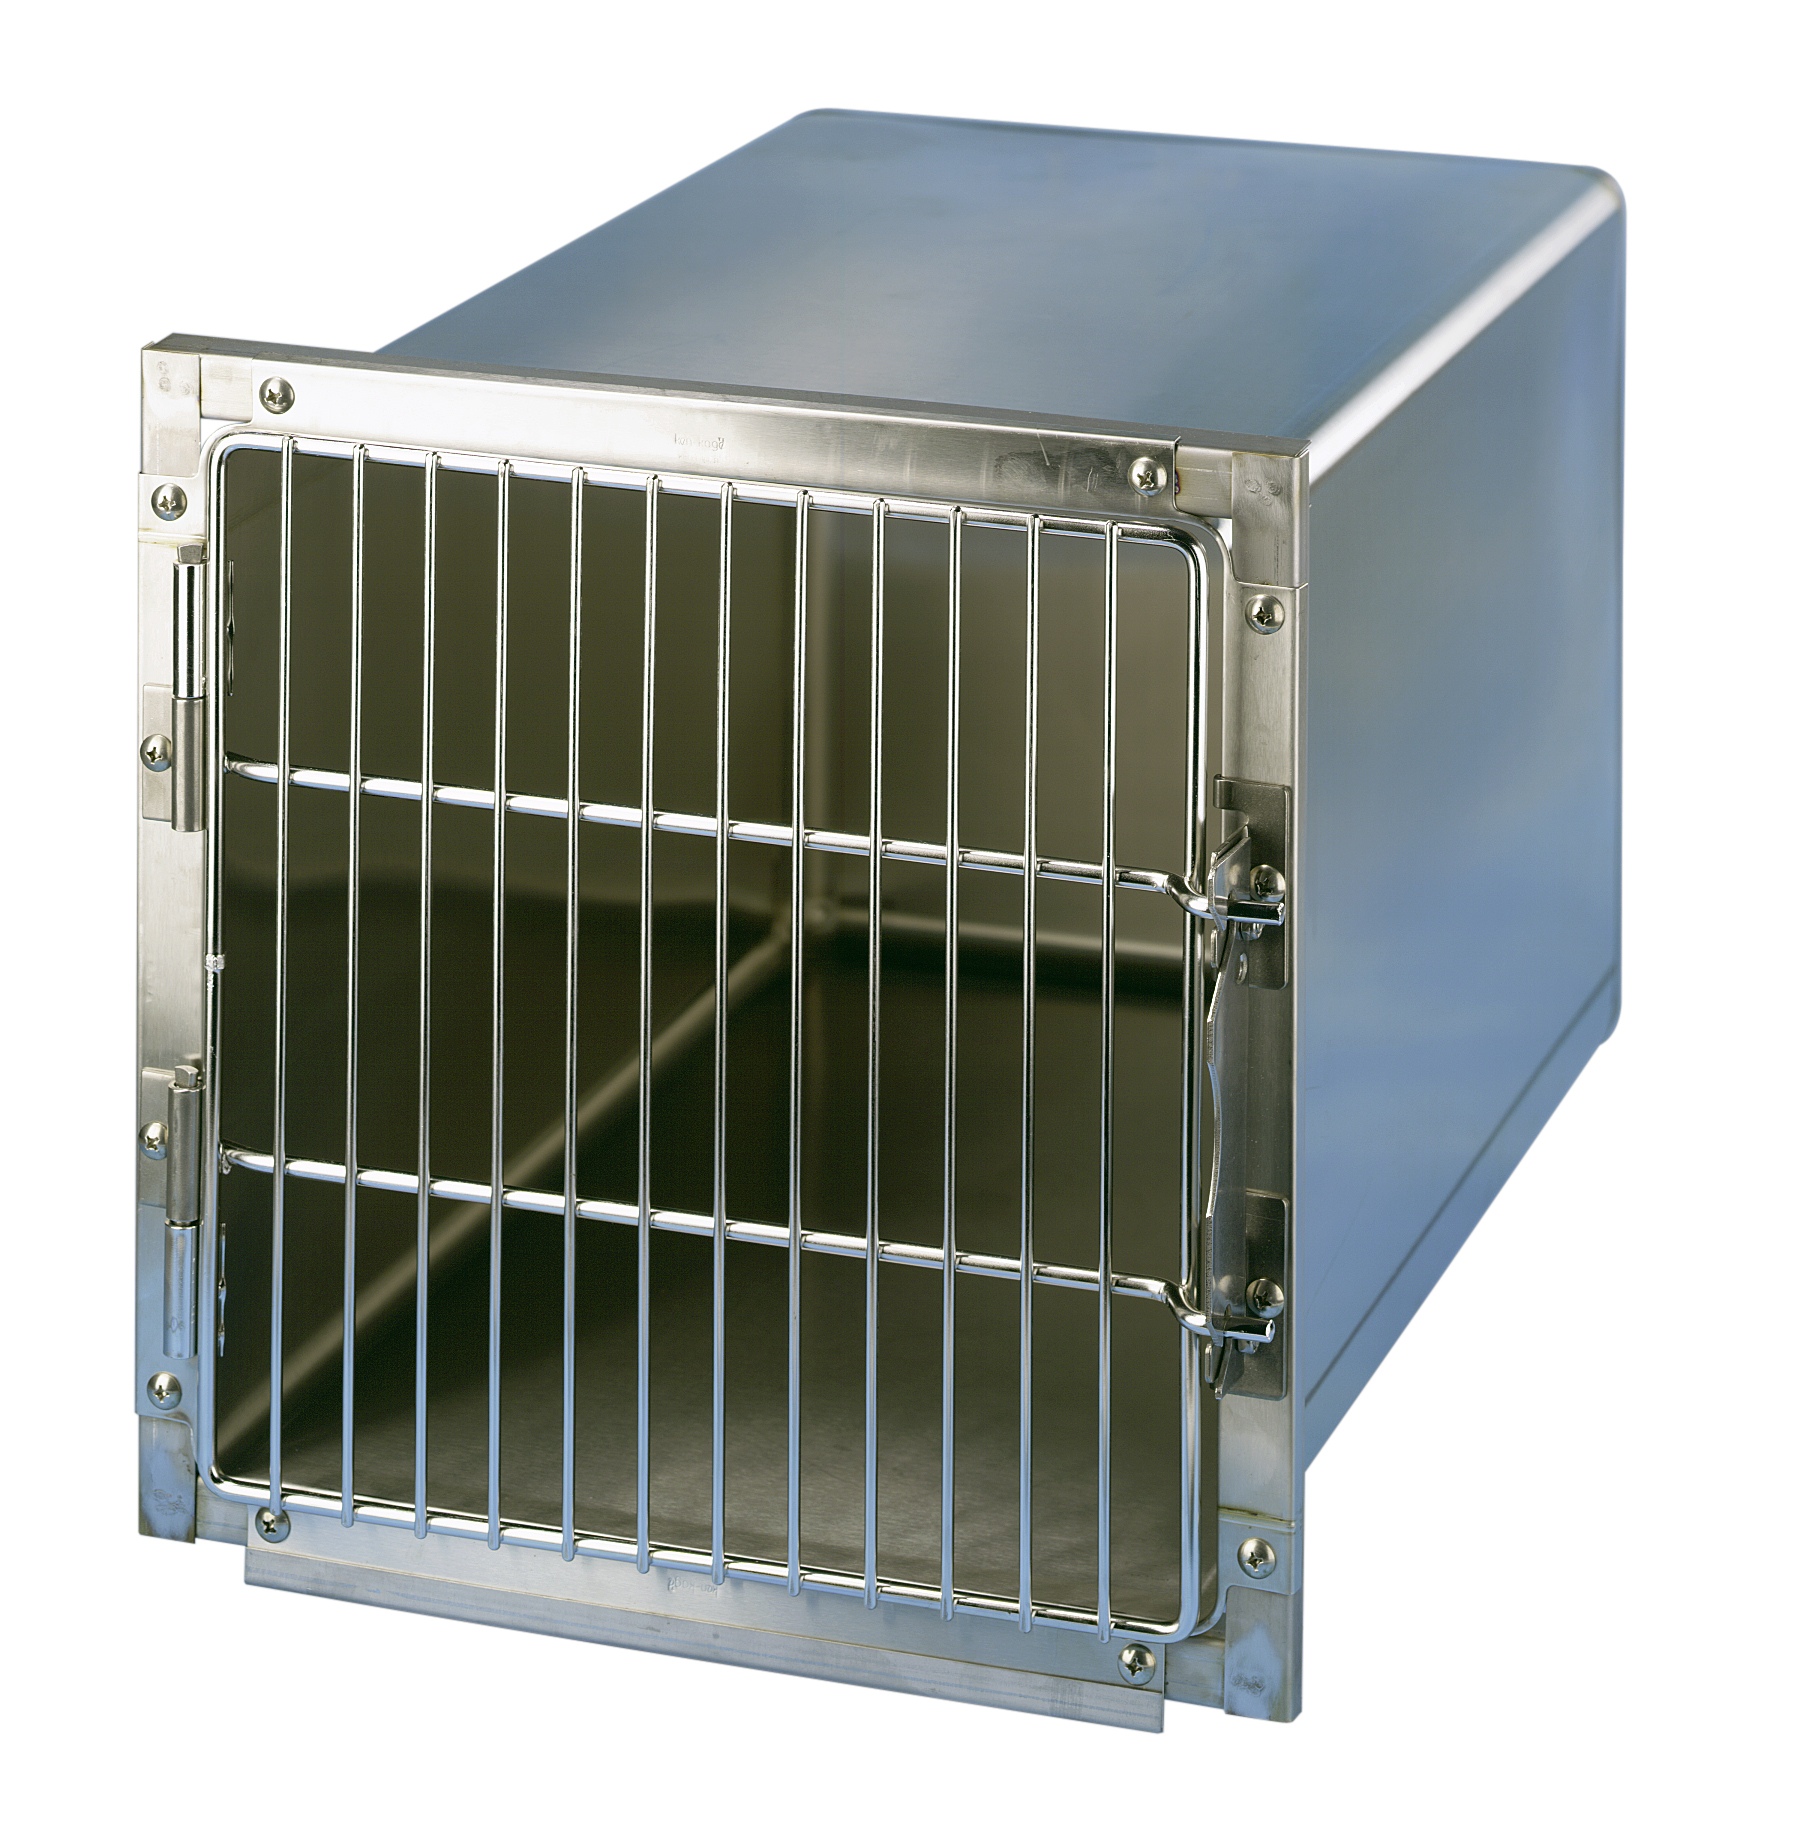 Ken-Kage cage stainless 60x60 cm